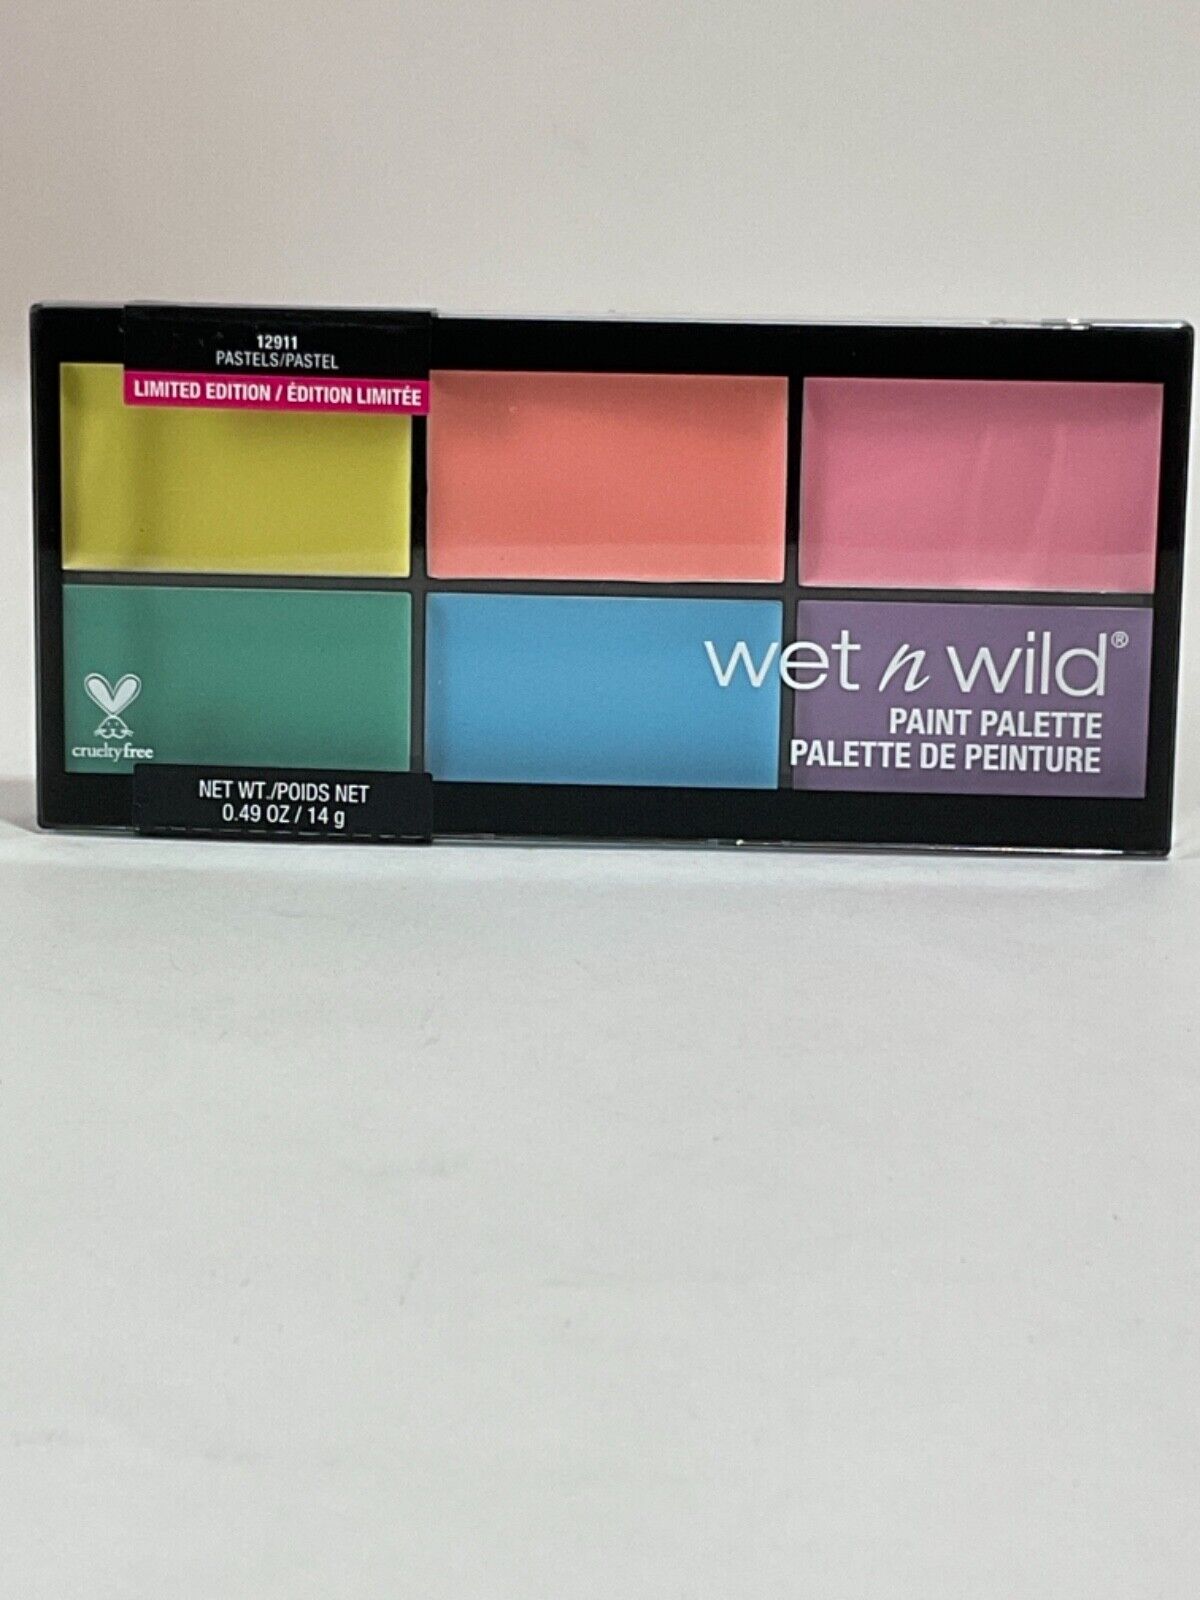 Primary image for Wet N Wild Paint Palette - Limited Edition *Choose your shade Pastels #12911